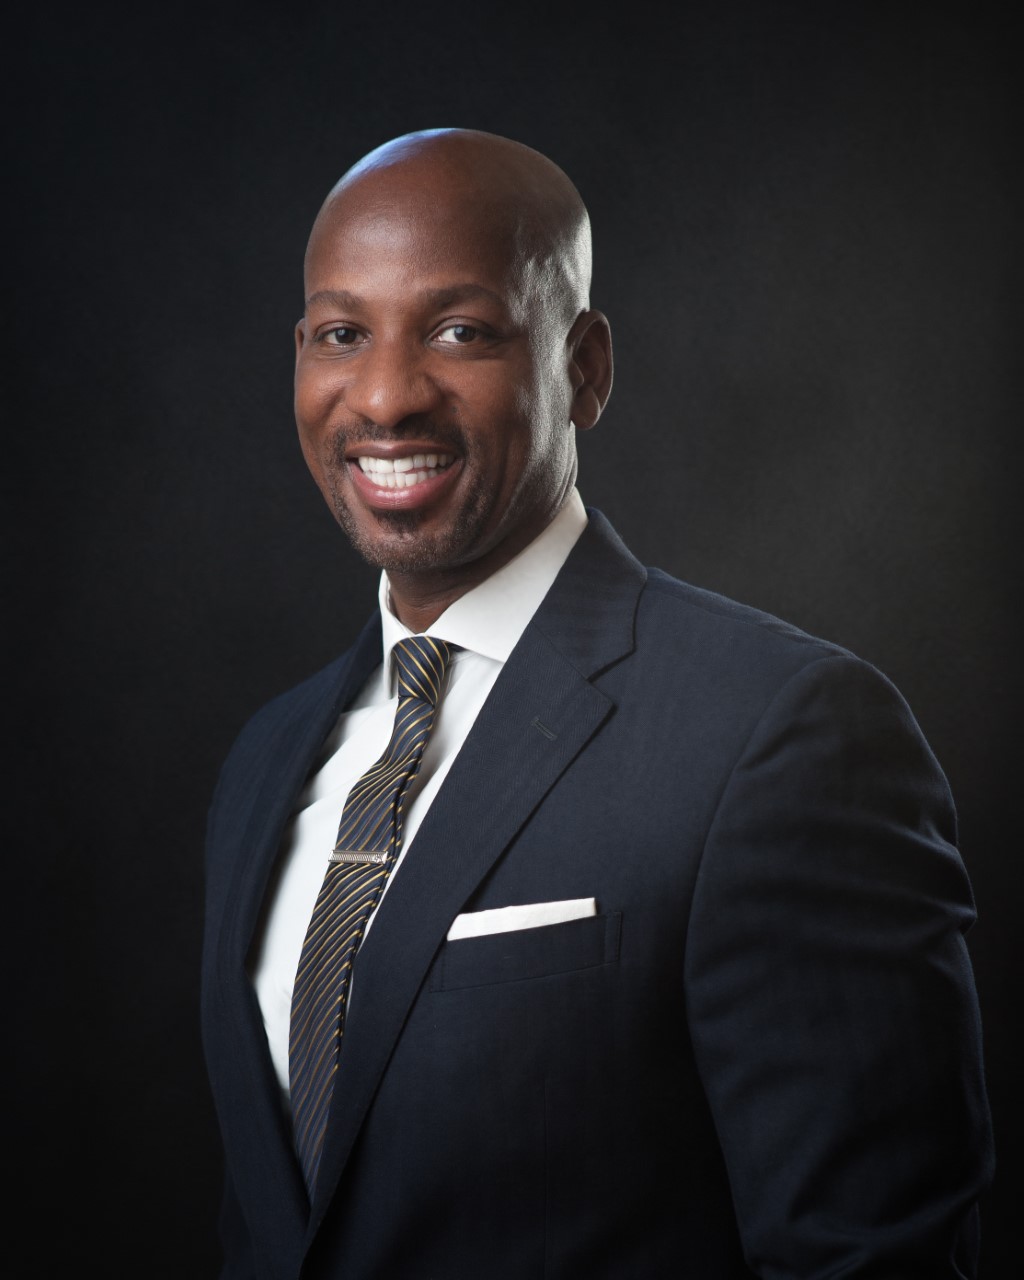 Irvin Bishop Jr., executive vice president and chief information officer (CIO) with Black & Veatch